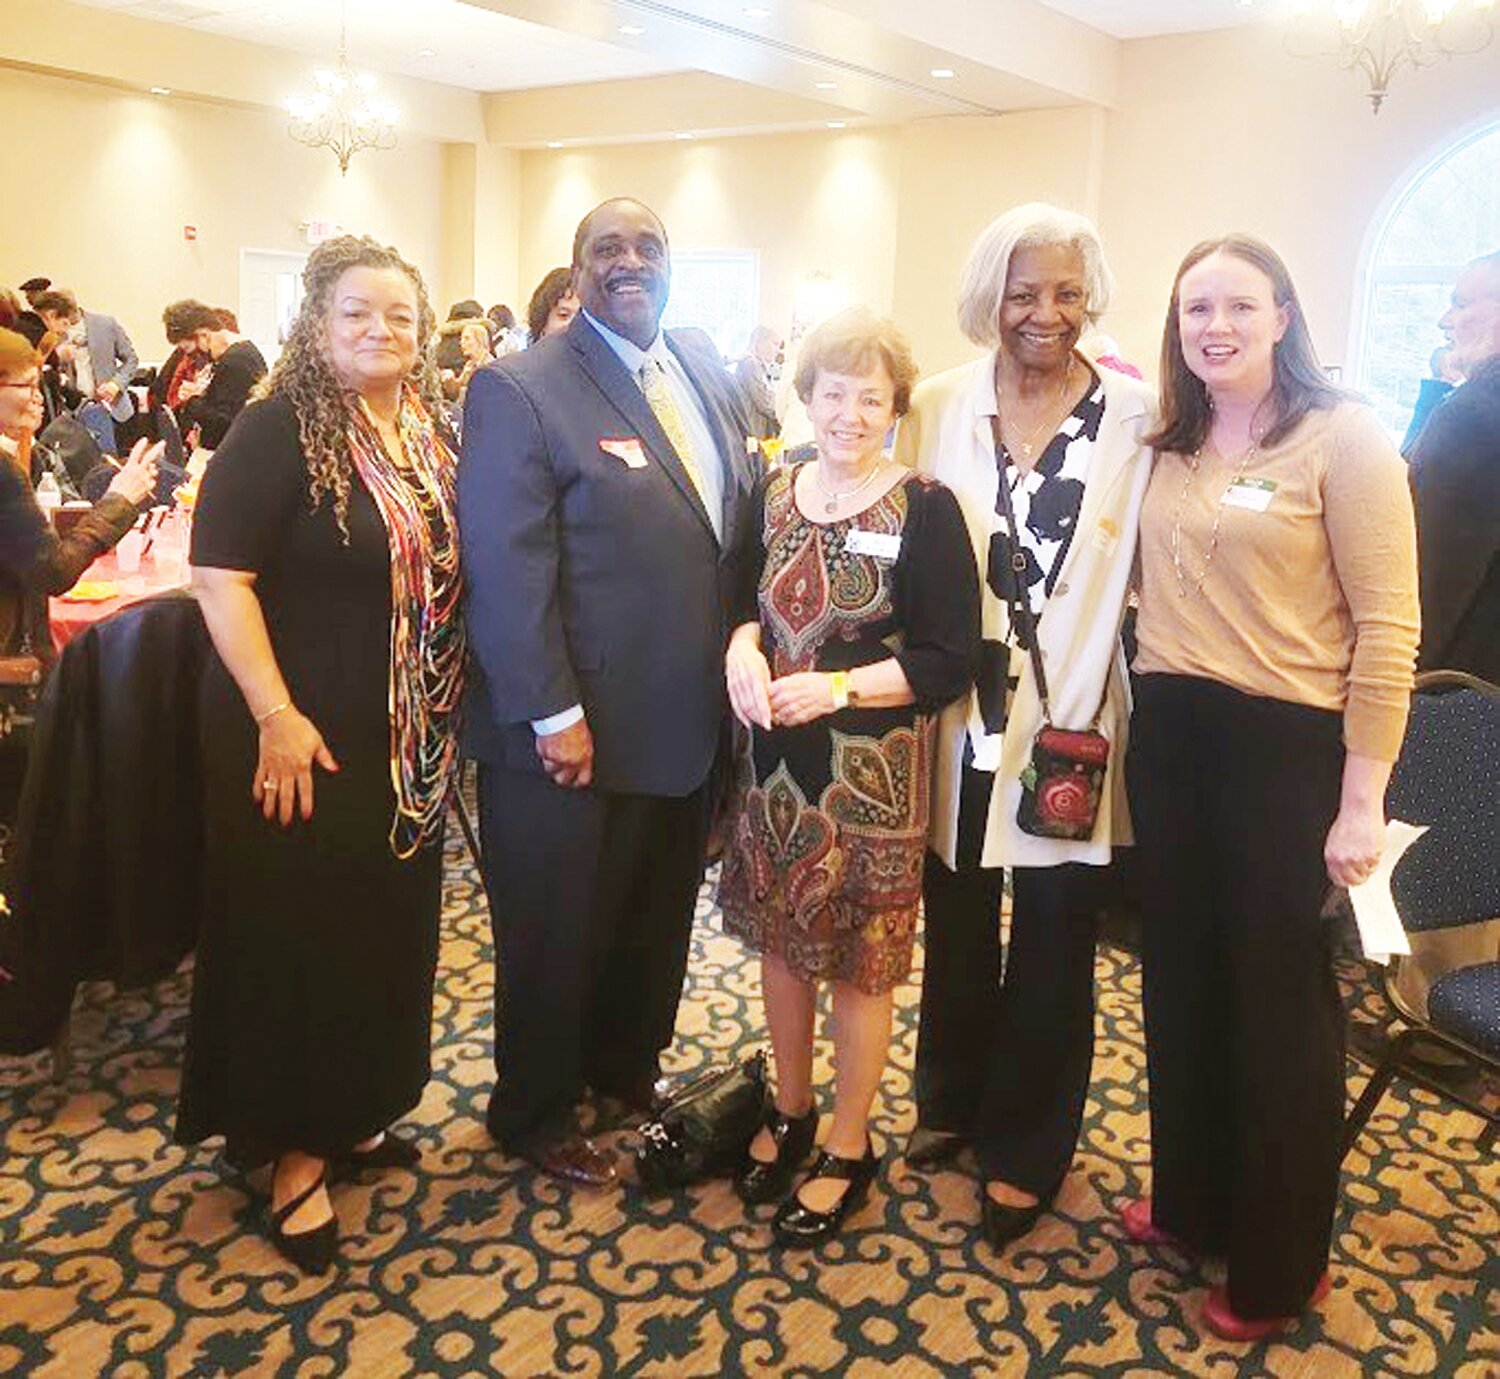 From left are Joan Toller, Second Baptist Church of Doylestown; the Rev. Dr. Robert Hamlin, Second Baptist Church of Doylestown; Bev Jewusiak, Doylestown Presbyterian Church; Linda Salley, president and executive director of the African American Museum of Bucks County; and the Rev. Becca Bateman, Doylestown Presbyterian Church.